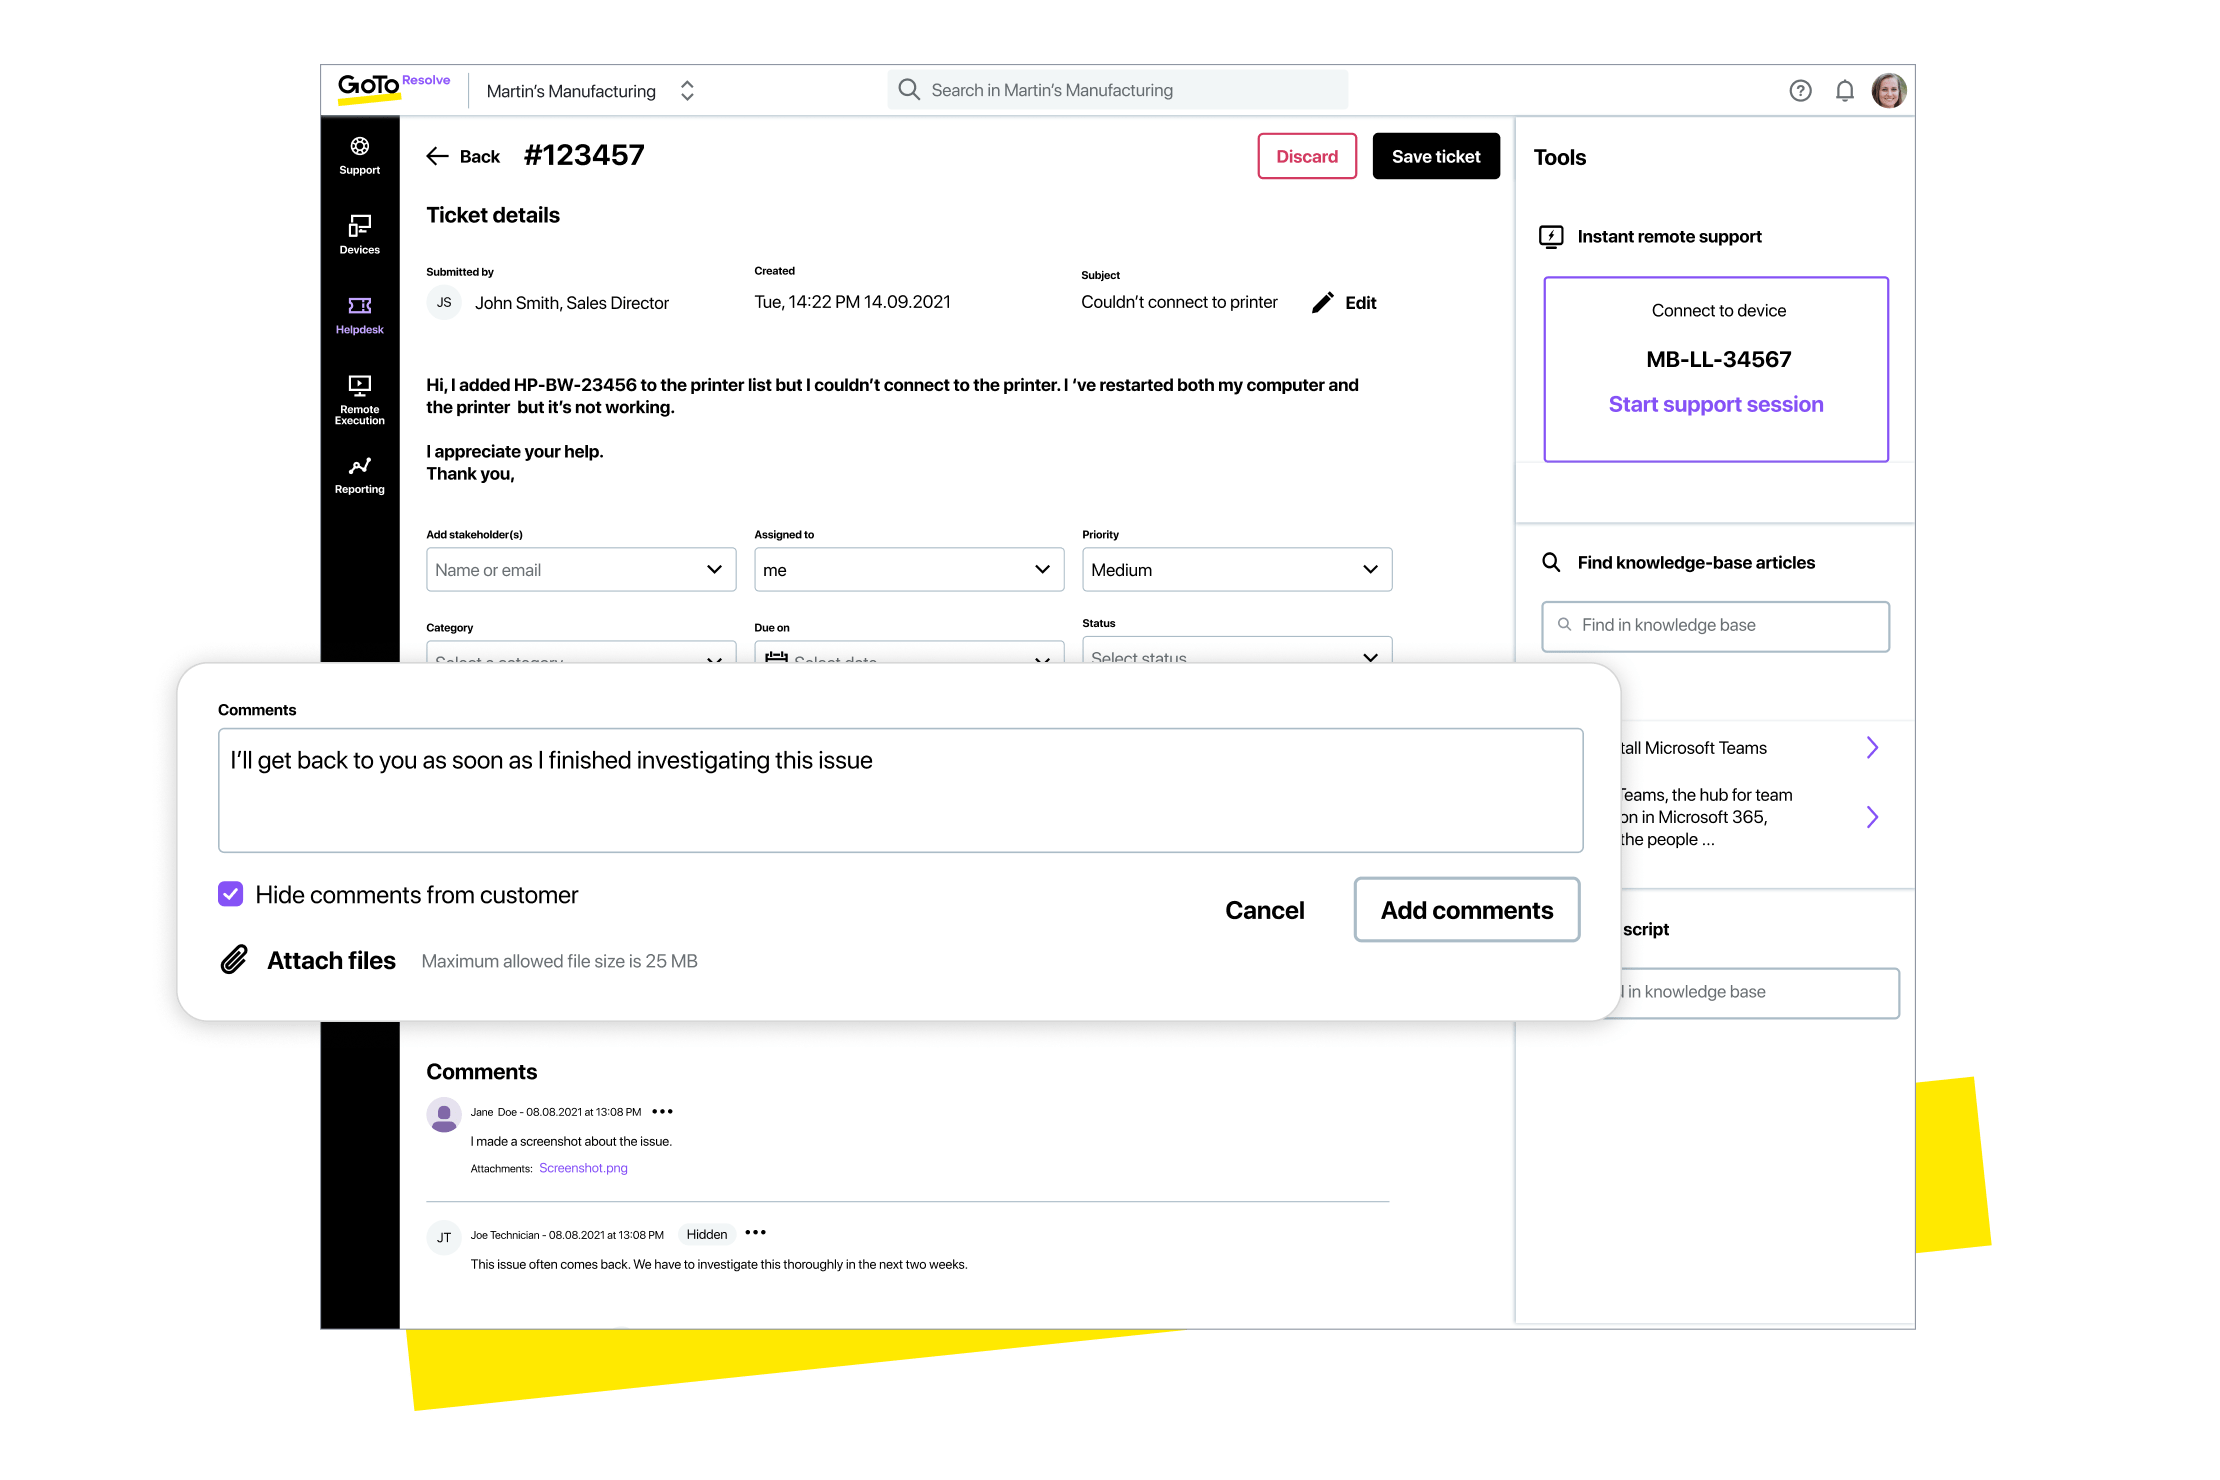 Screen showing commenting on an open ticket.